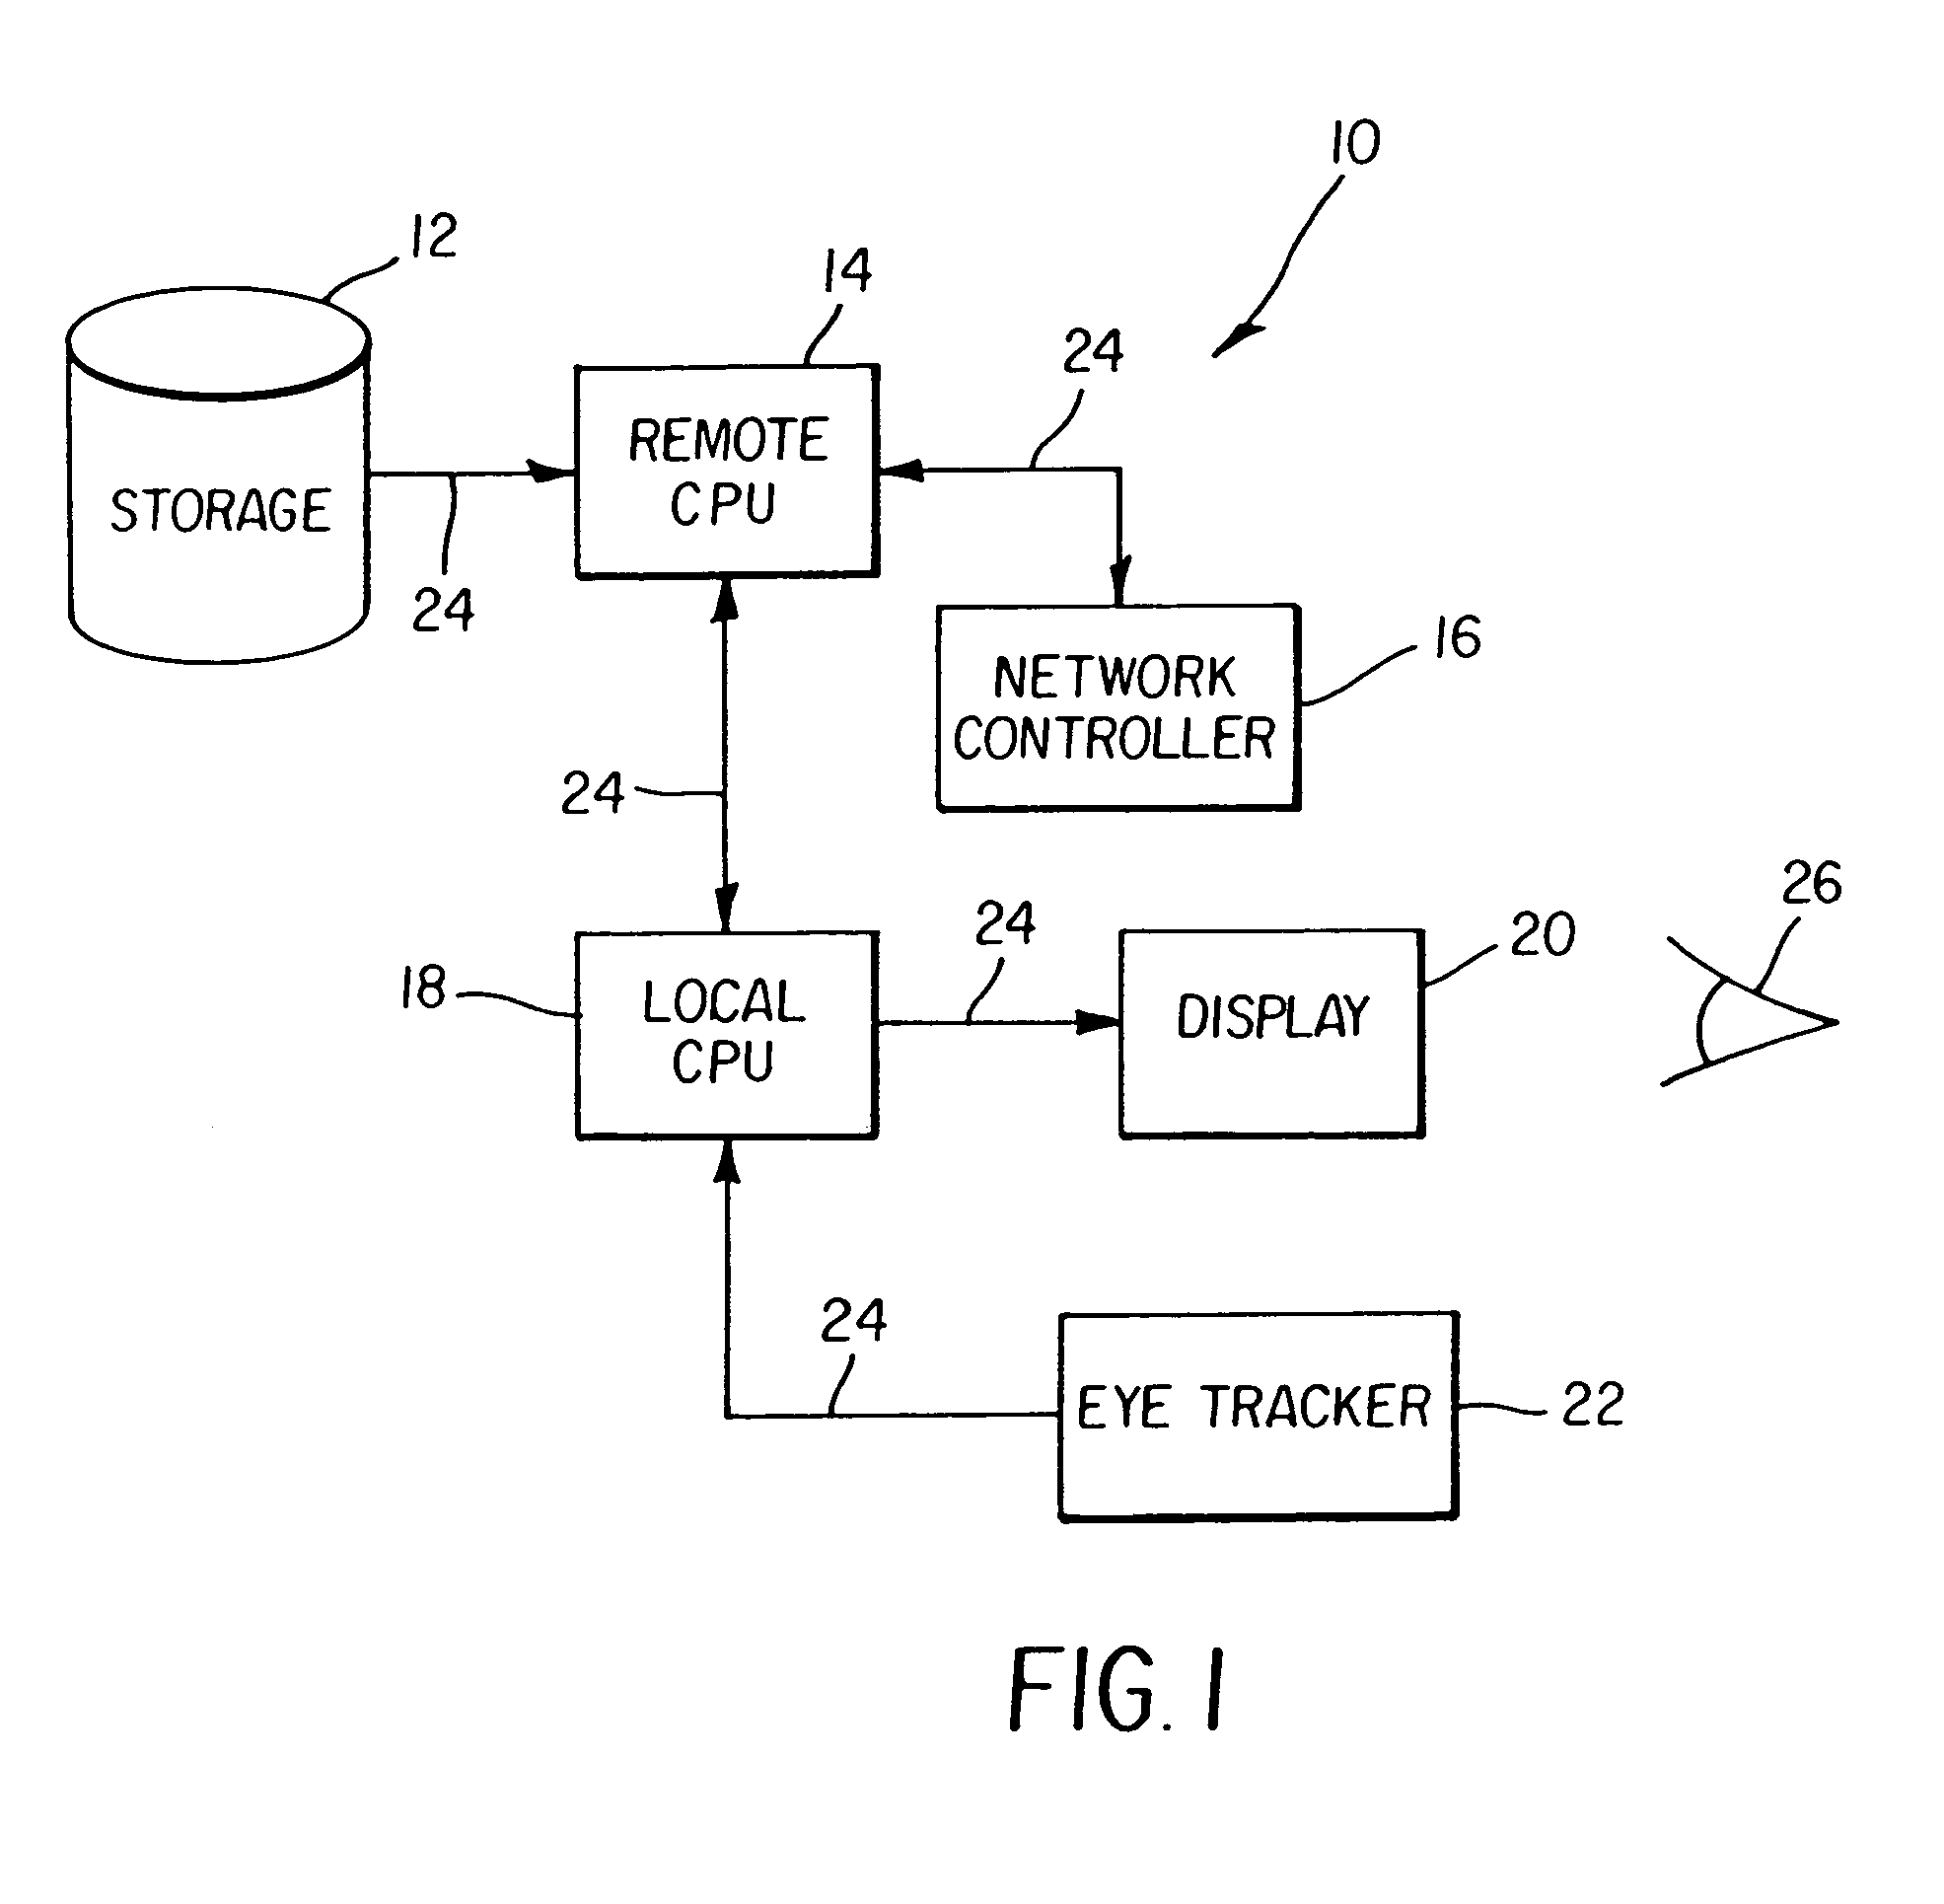 Method and system for displaying an image